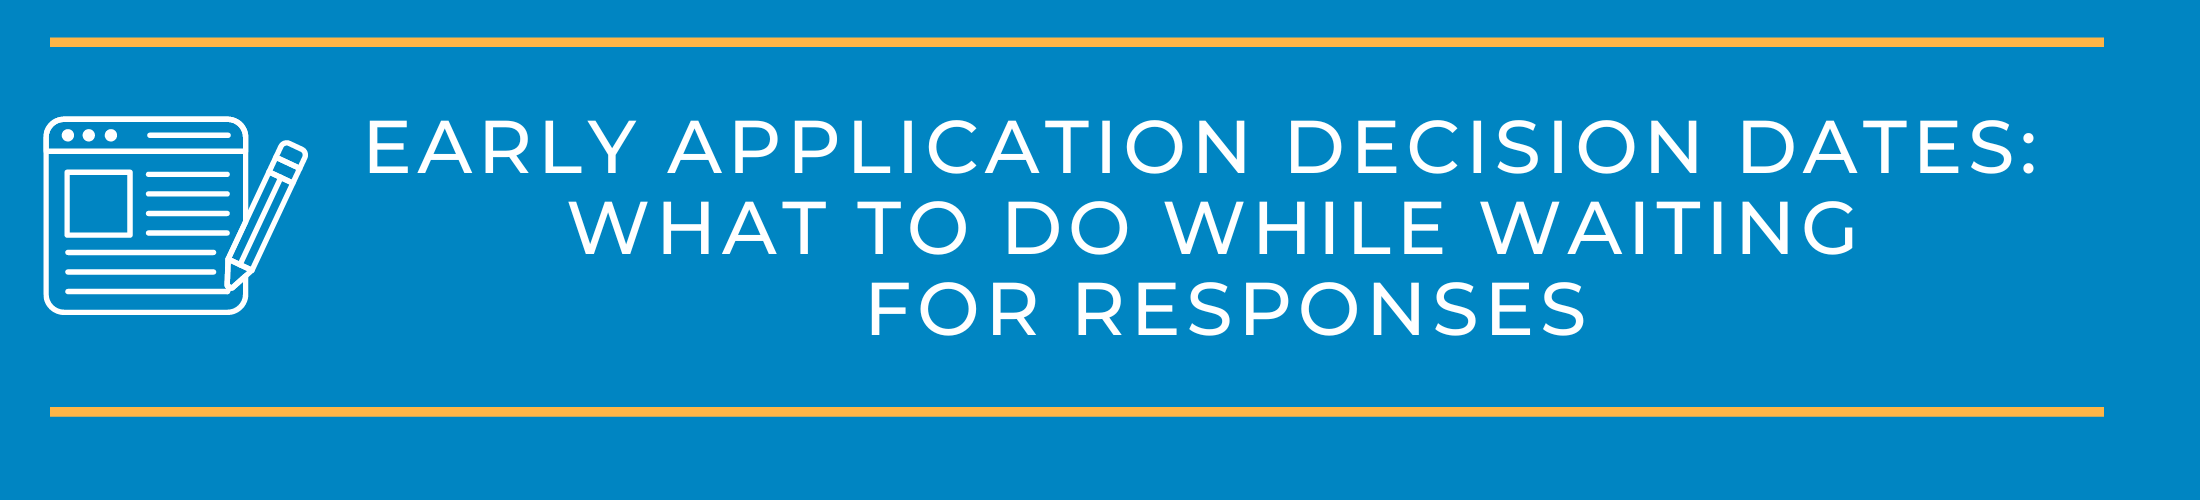 Early Application Decision Dates: What to Do While Waiting for Responses